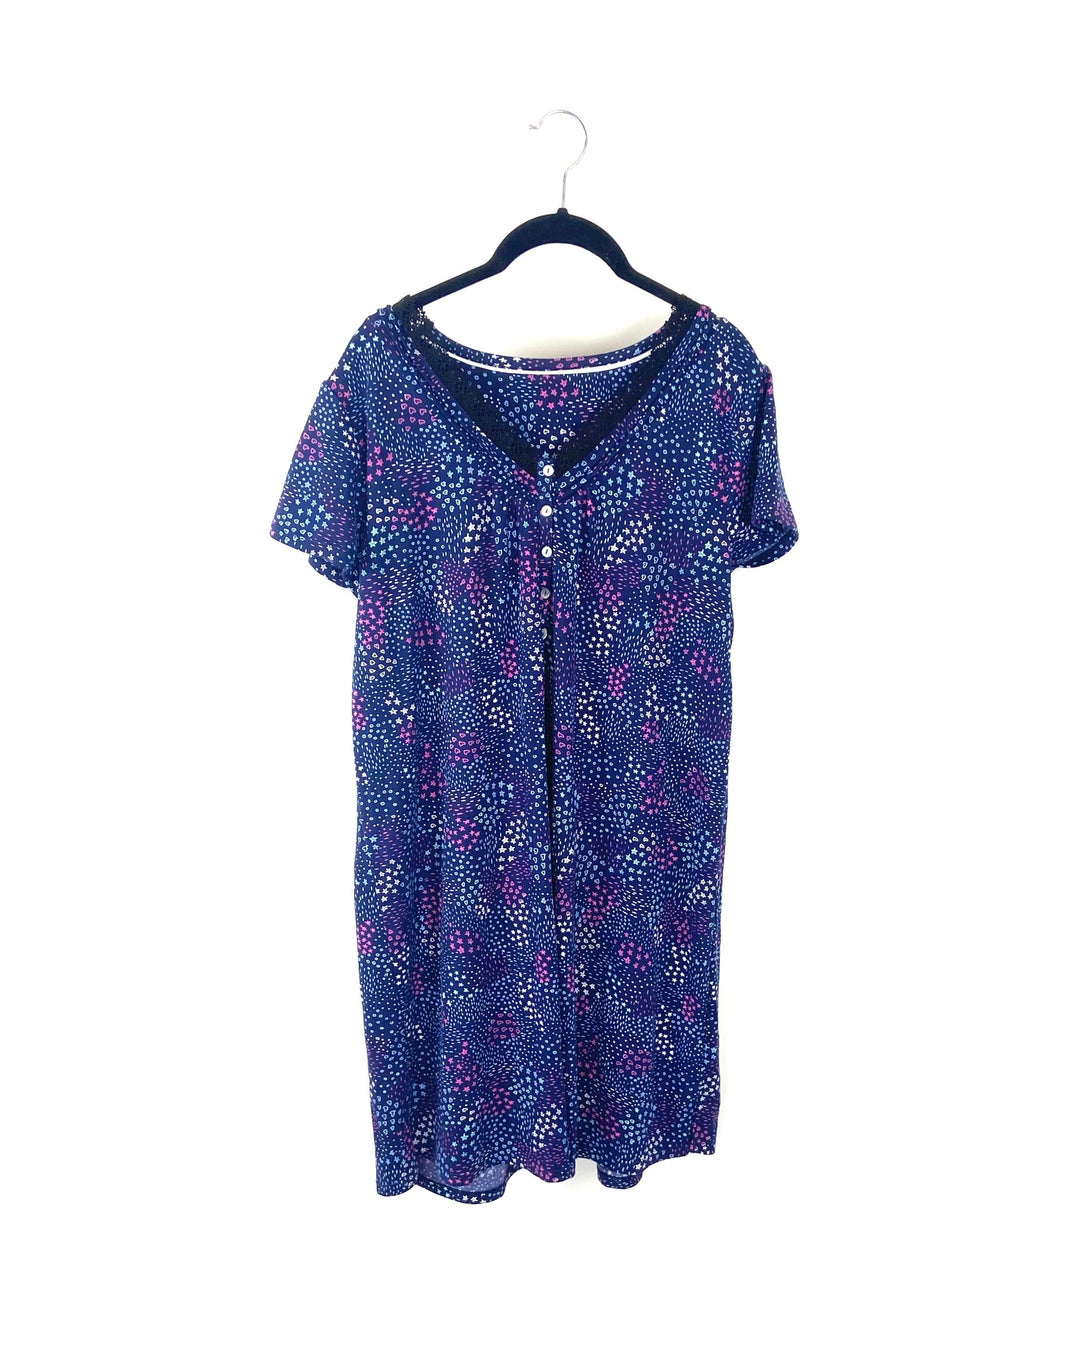 Star and Heart Printed Nightgown - Small